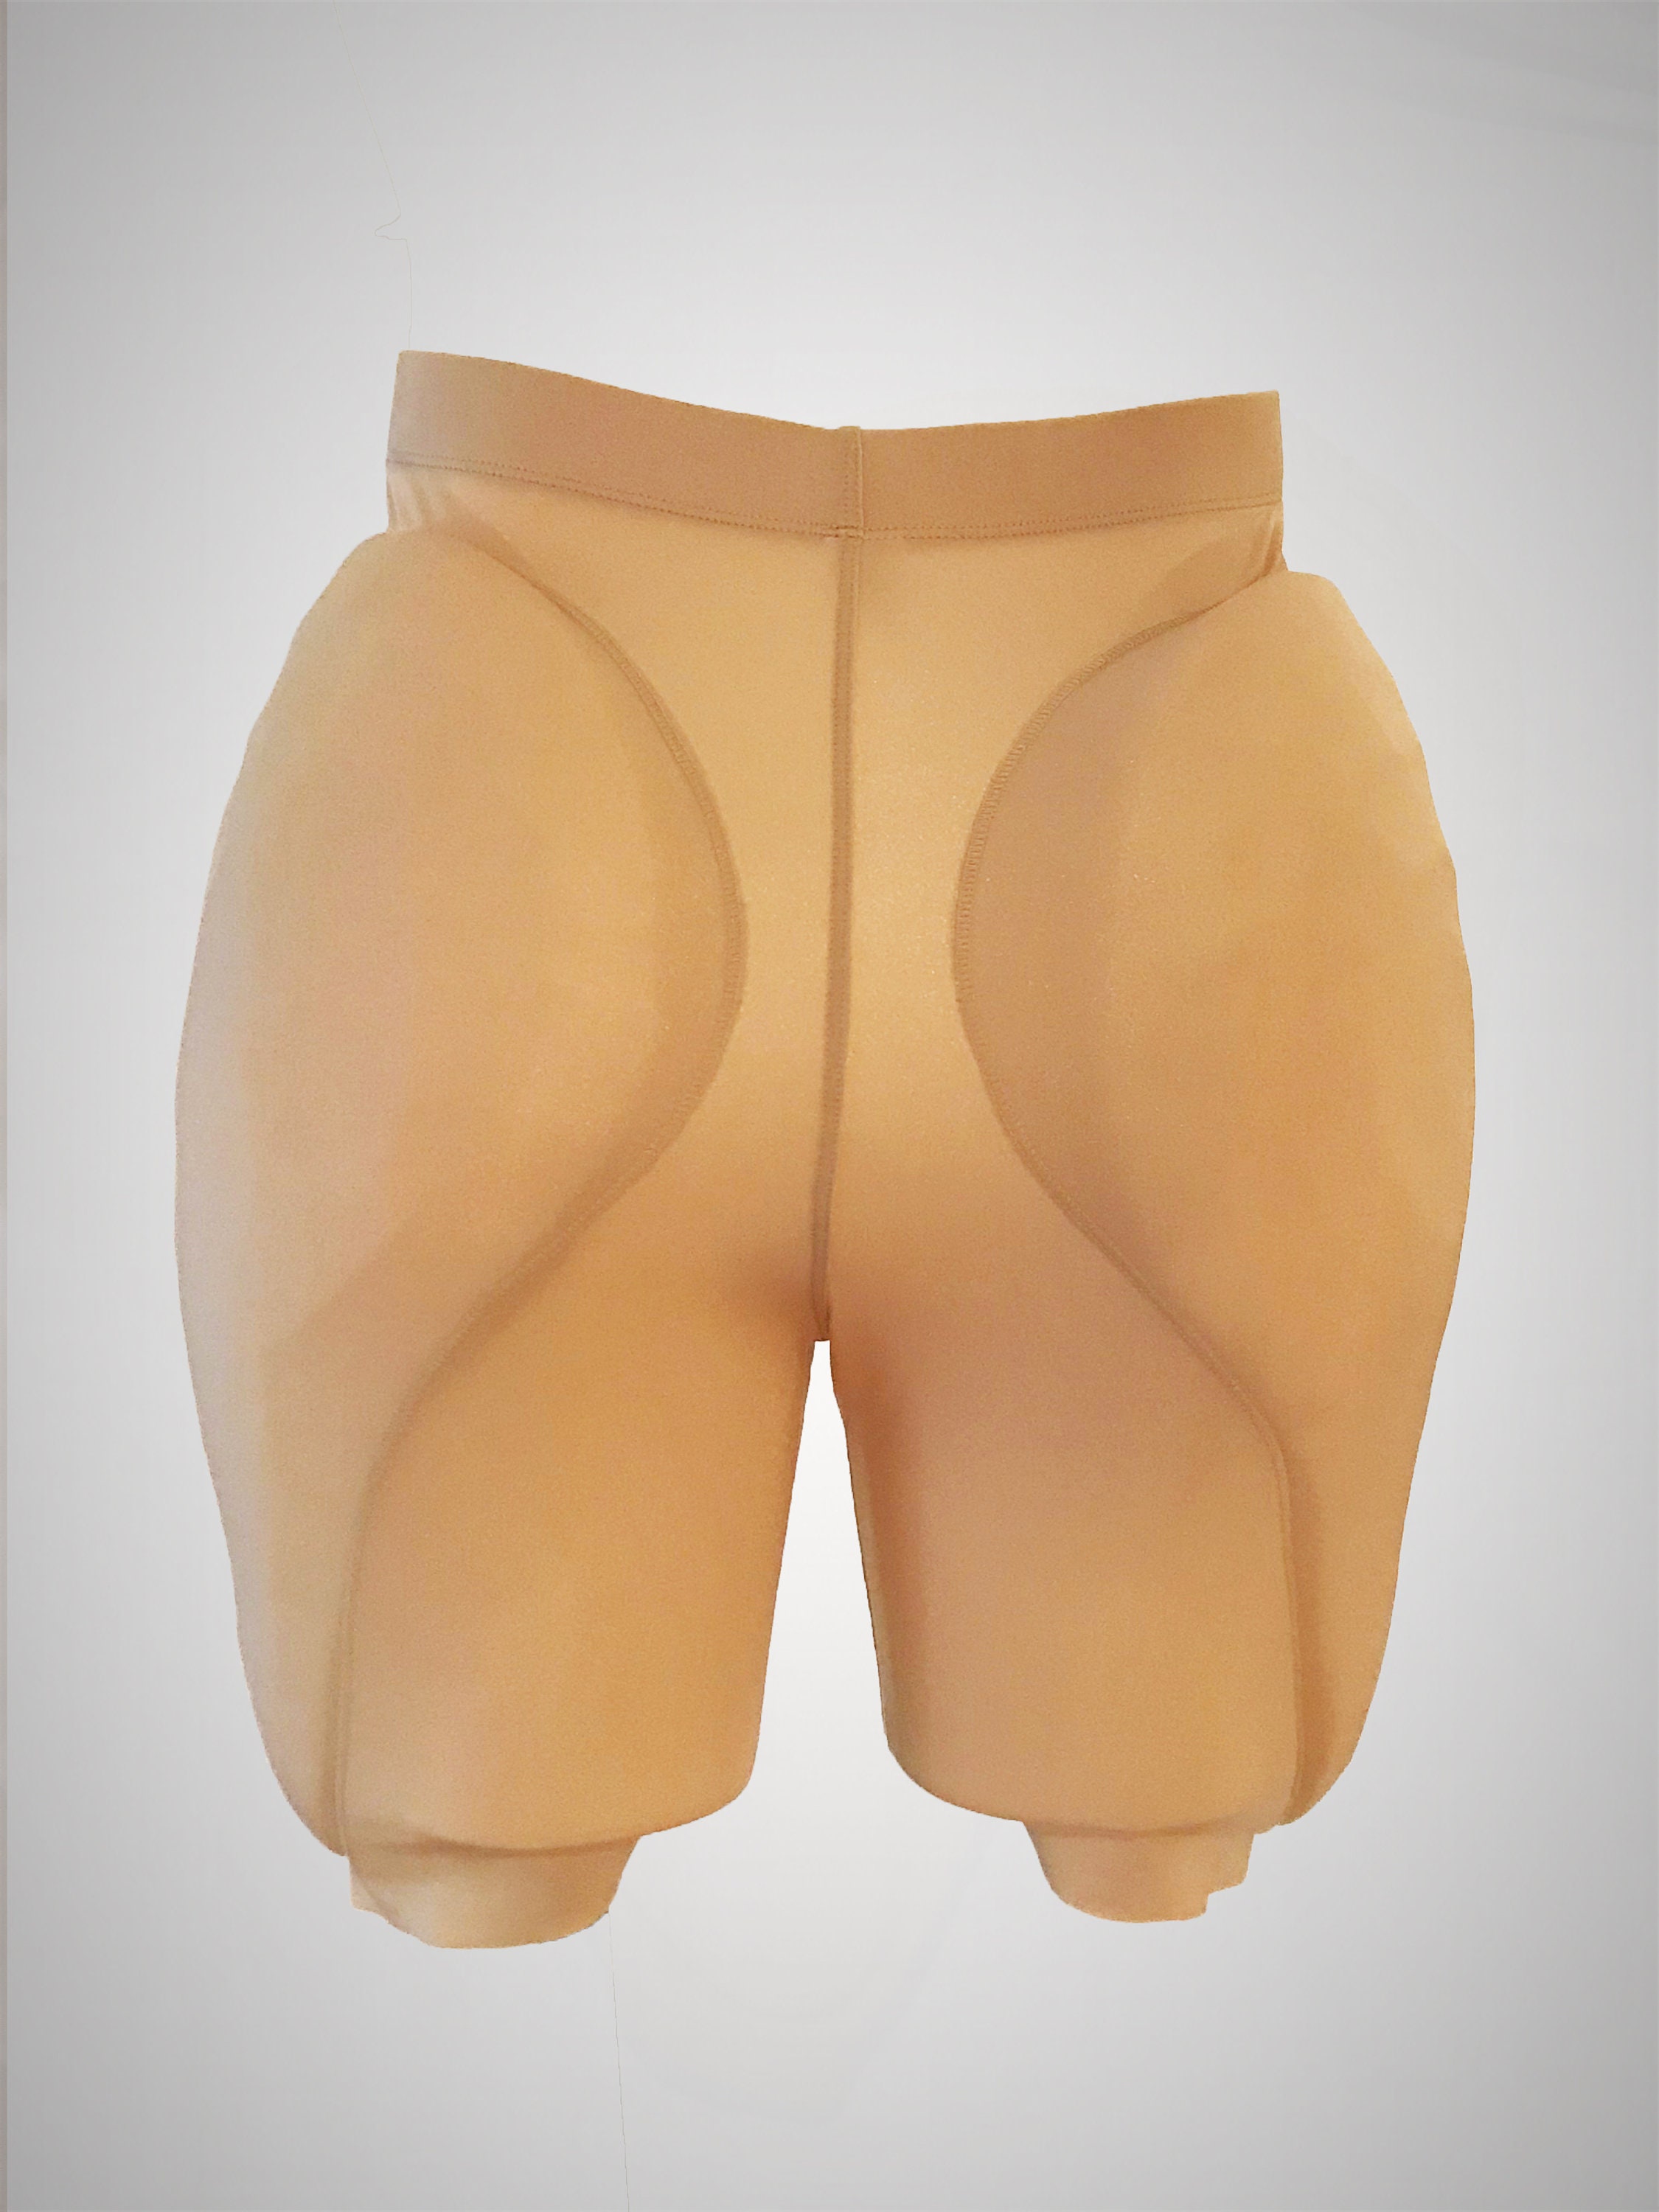 1 Inch Astrobooty Hip/butt Pads for M2F and Cross Dressers 